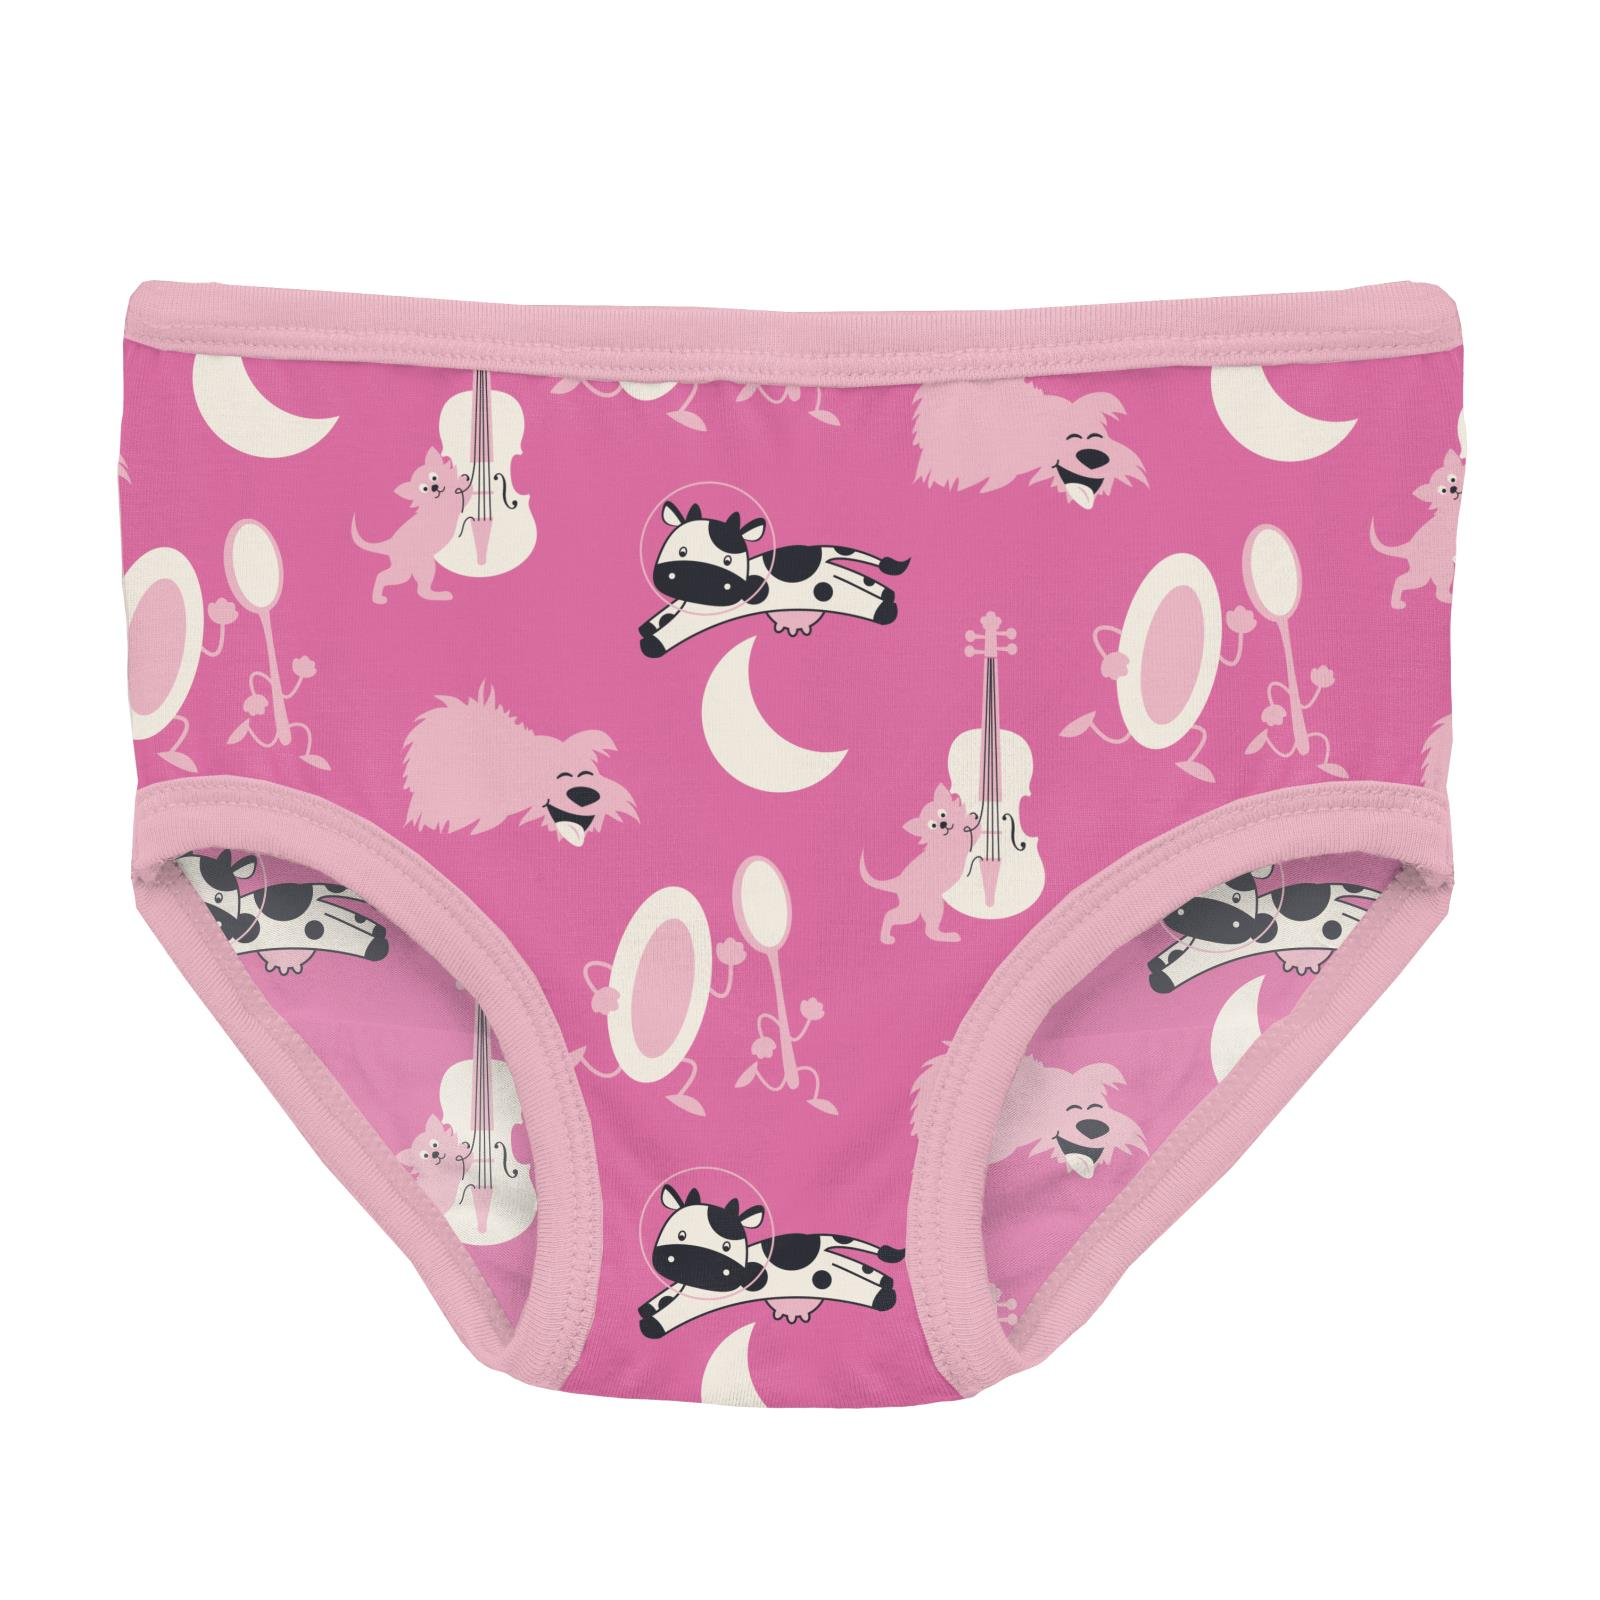 Kickee Pants – Bellies to Babies Boutique